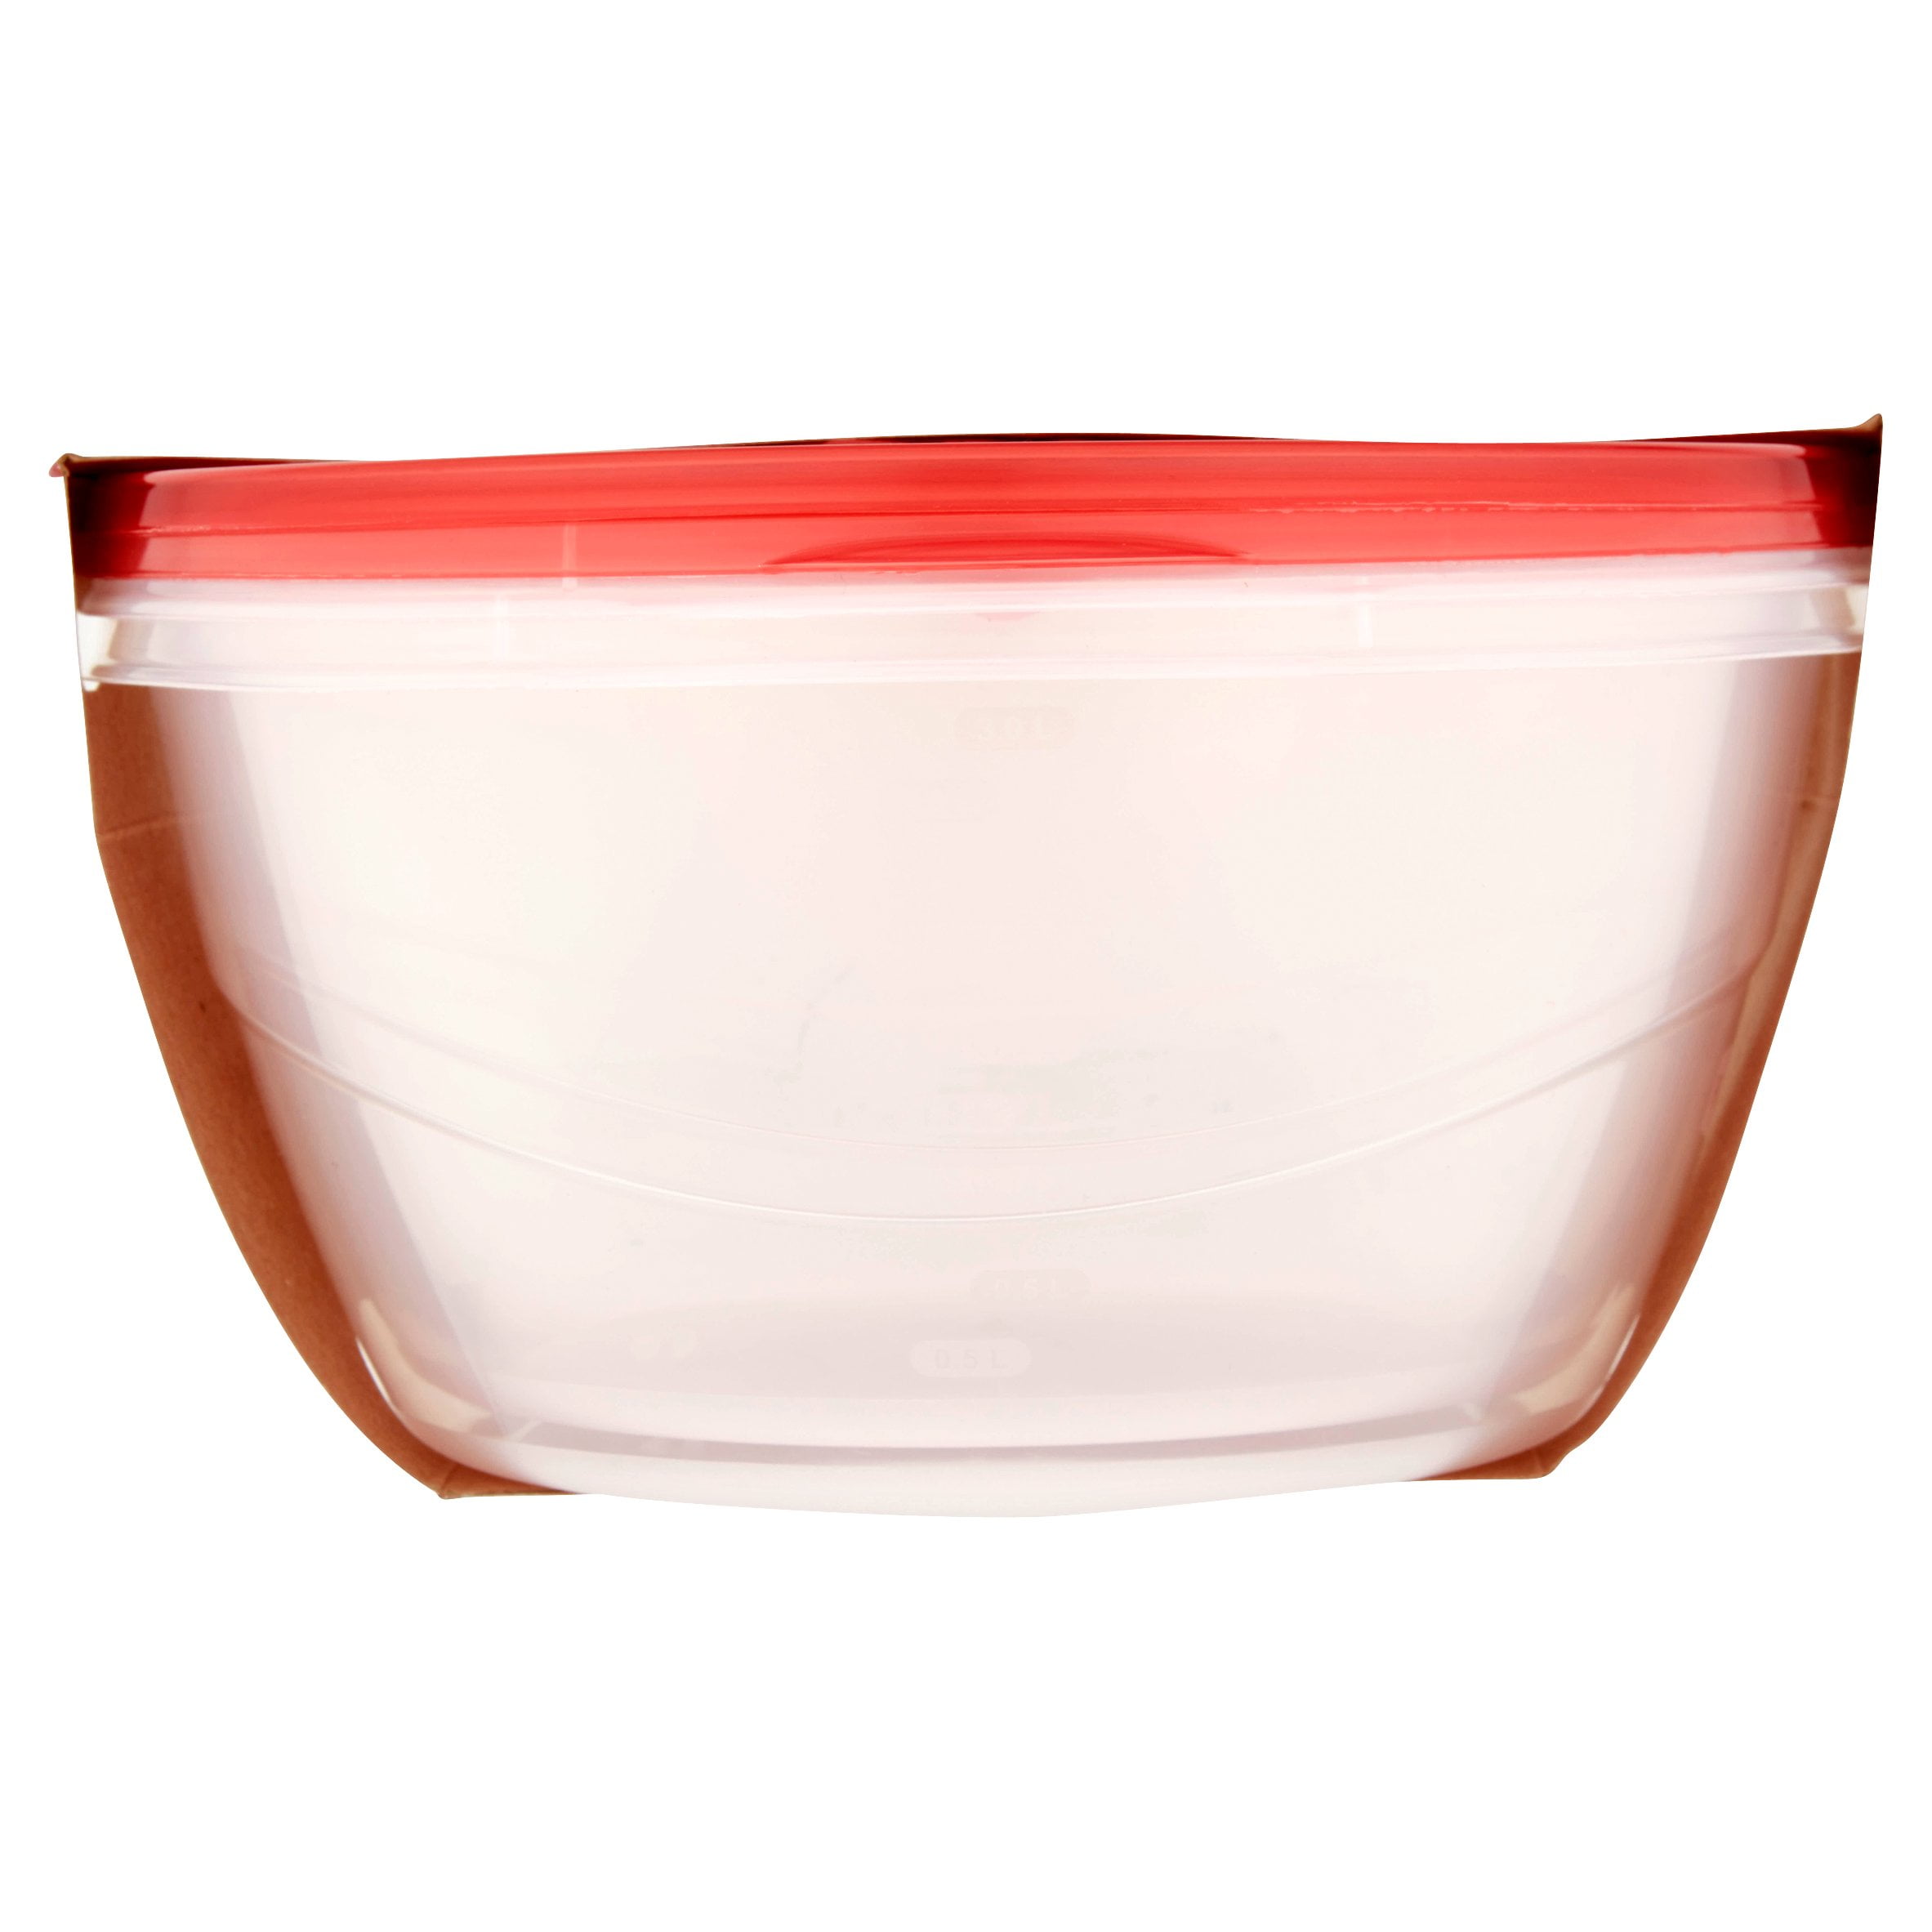 Rubbermaid 1787831 TakeAlongs Round Serving Bowl Food Storage Container, 13-Cup